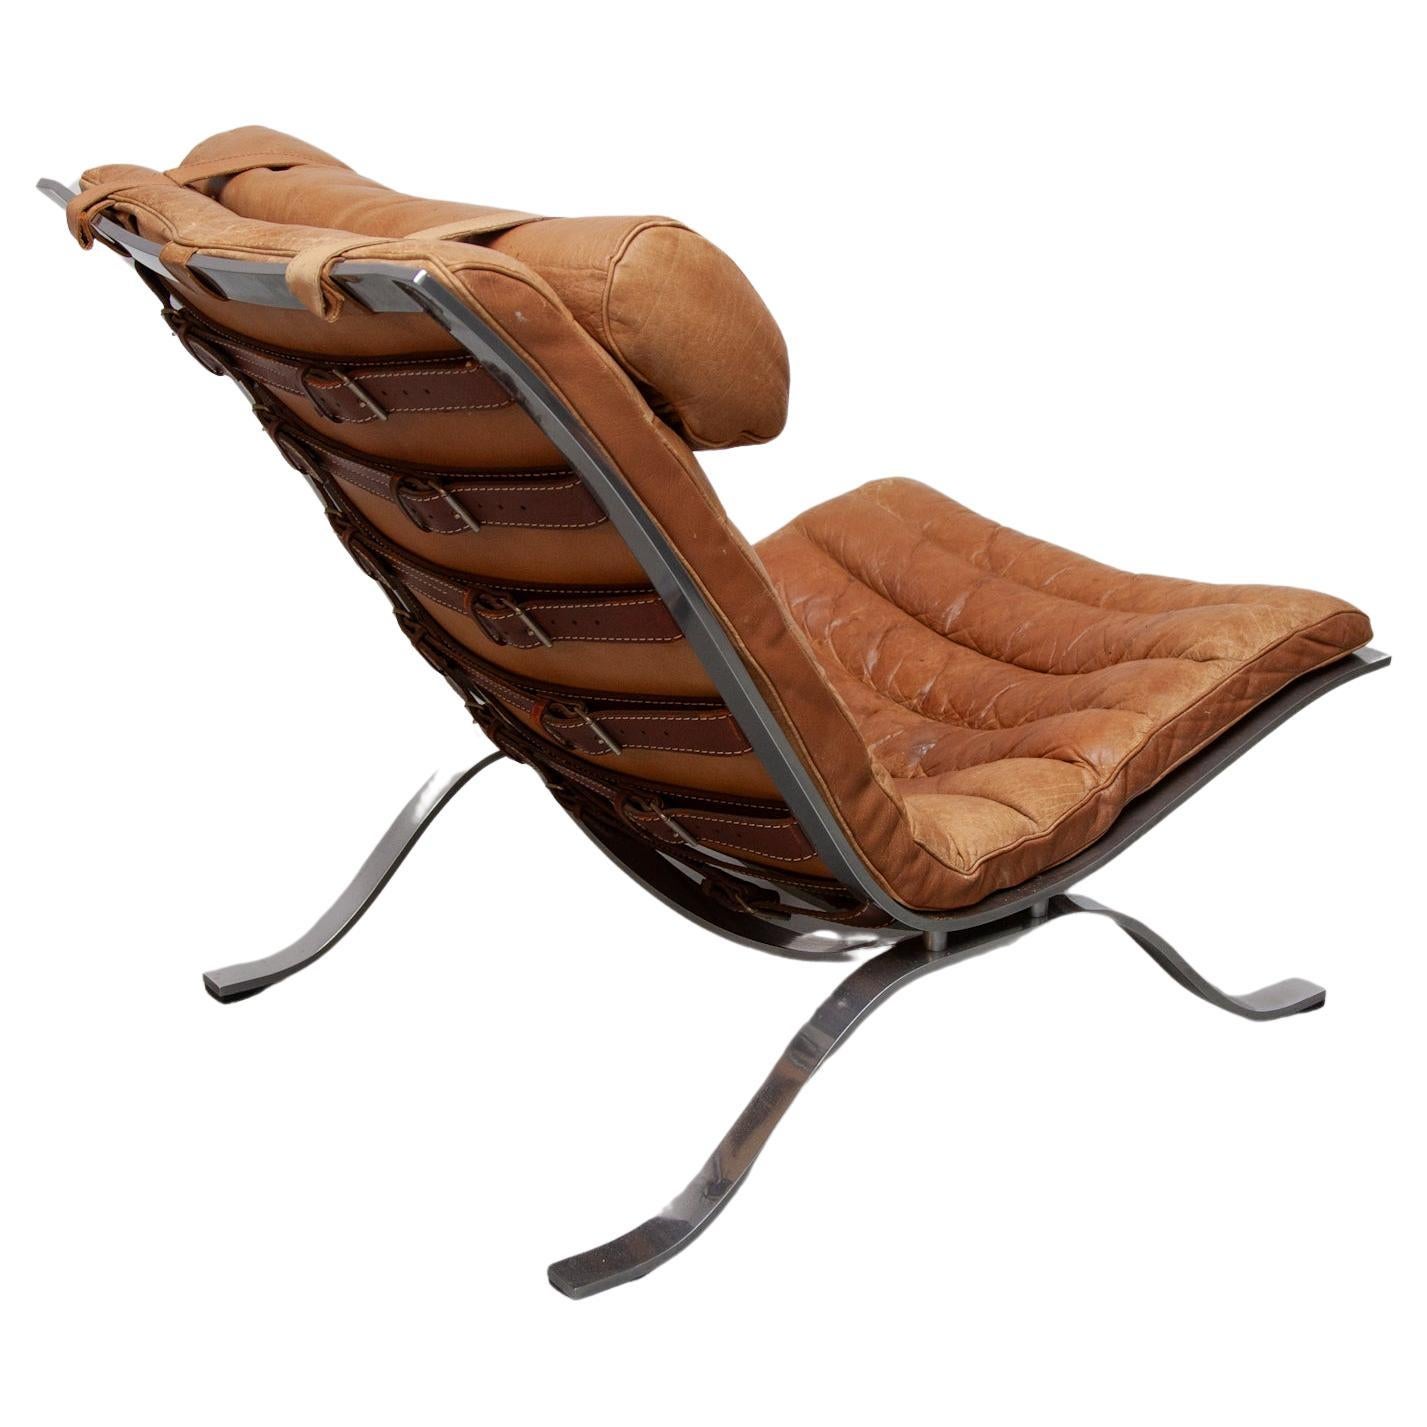 Brutalist 1960s Arne Norell "Ari" Lounge Chair in Cognac Leather, Sweden